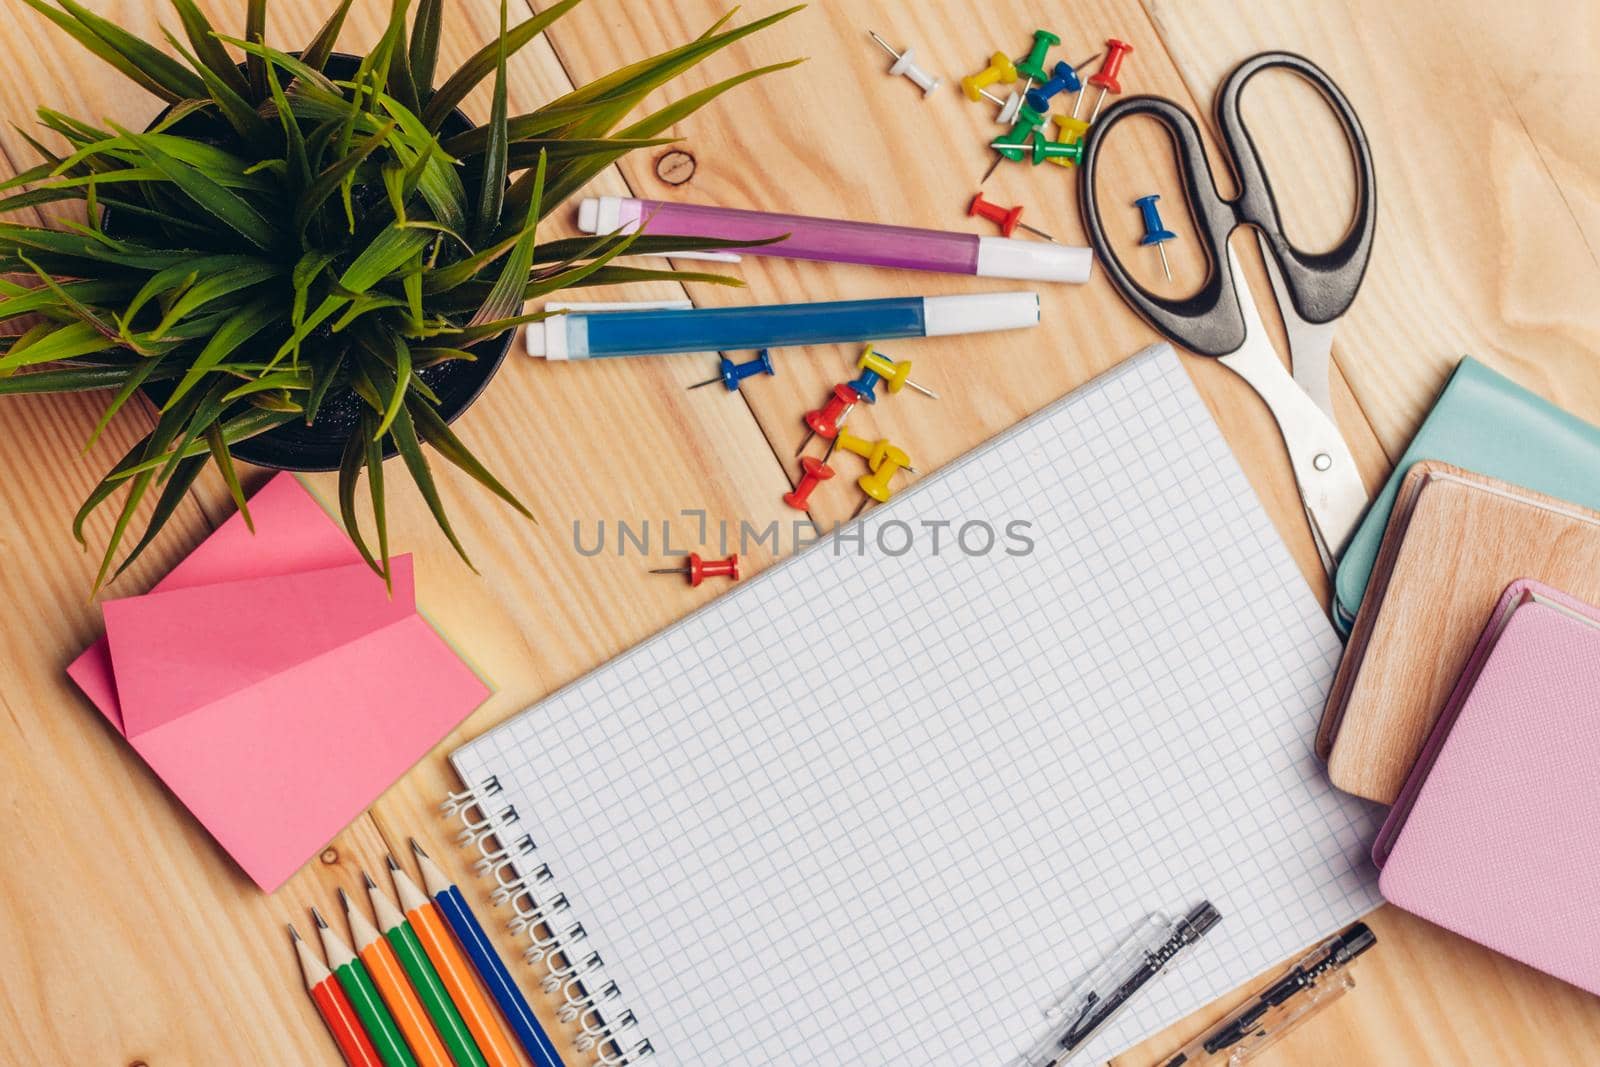 multicolored pencils and markers scissors paper creativity. High quality photo